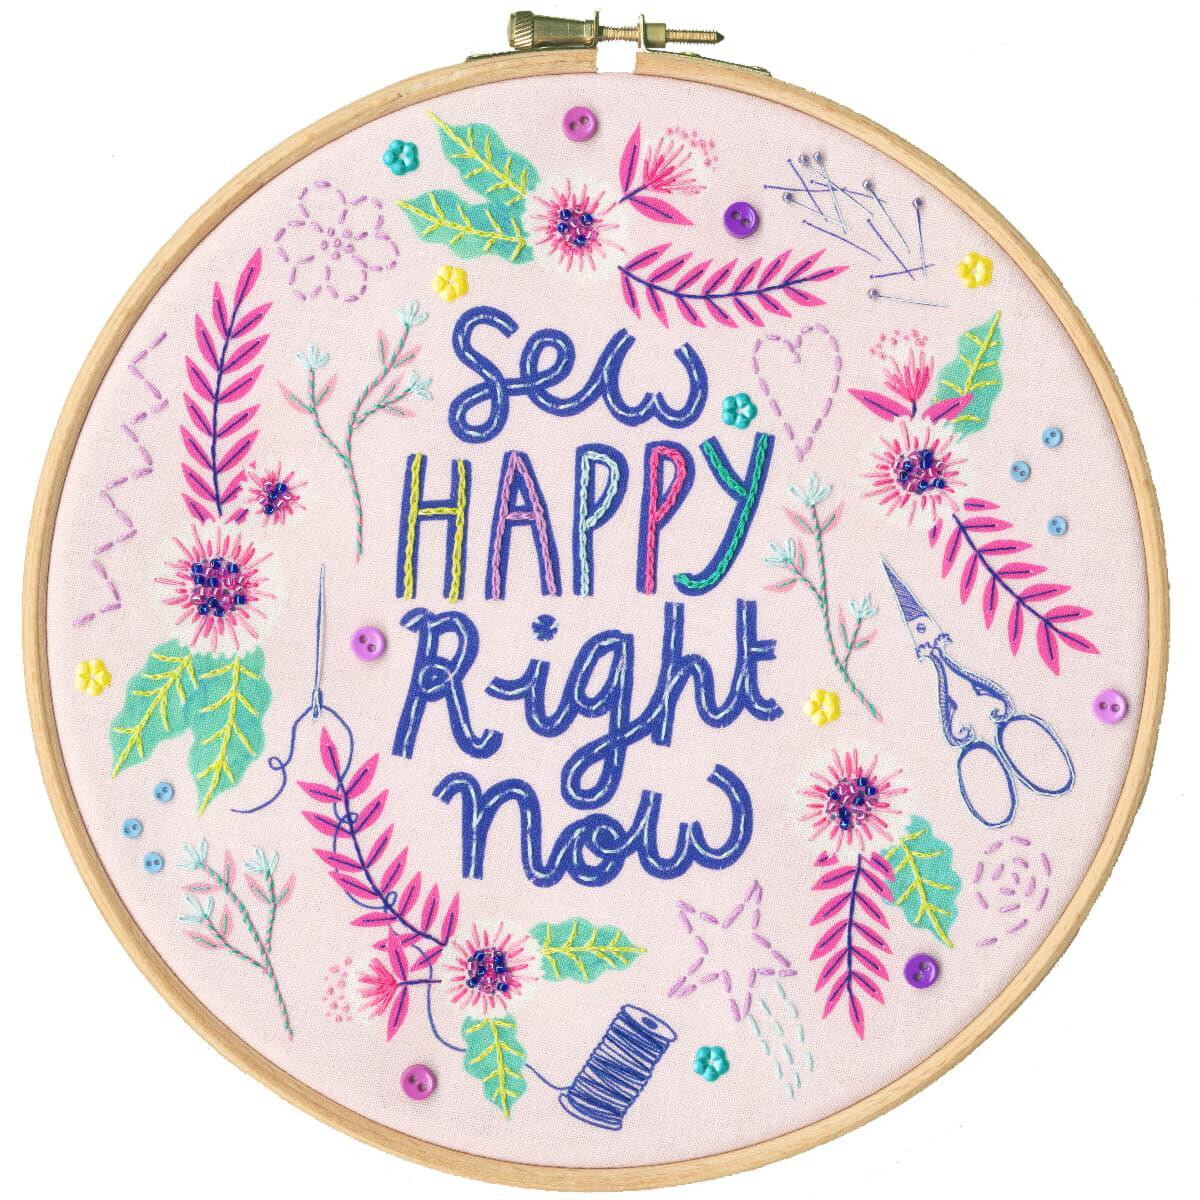 A decorative embroidery hoop with colorful stitching...